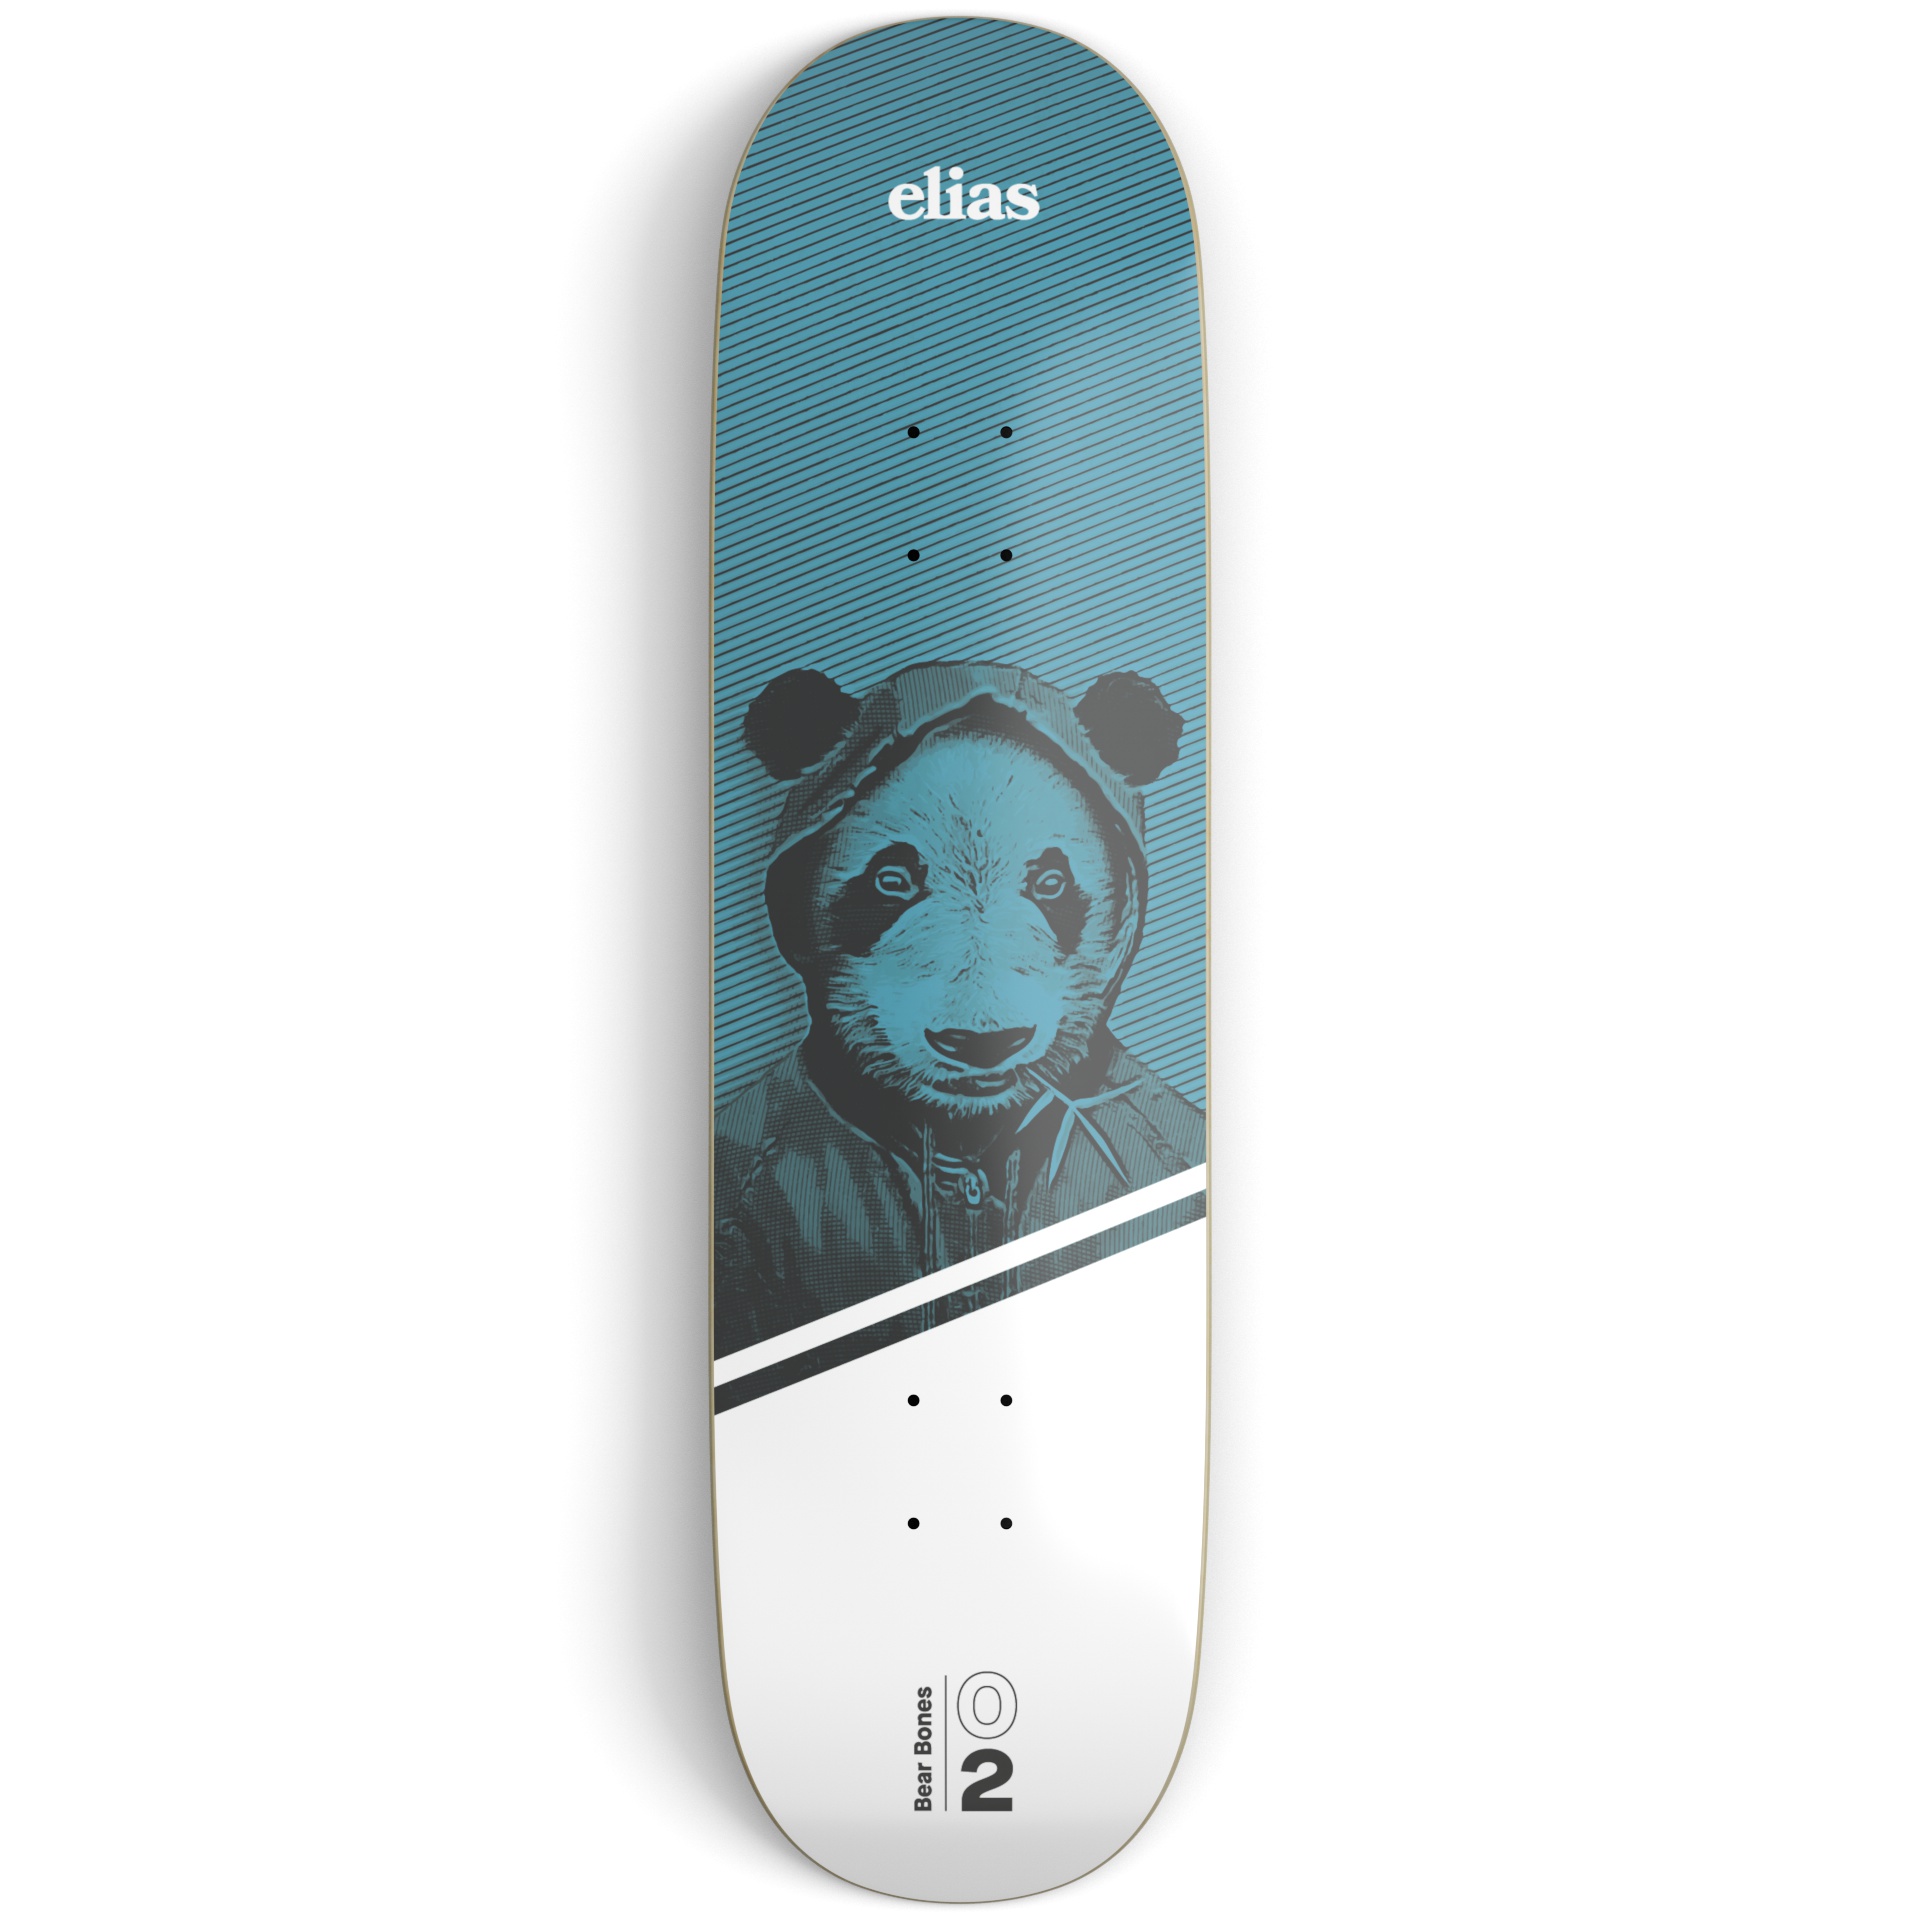 Blue and white skateboard deck on a light grey surface printed with an illustration of a panda bear and white and black text